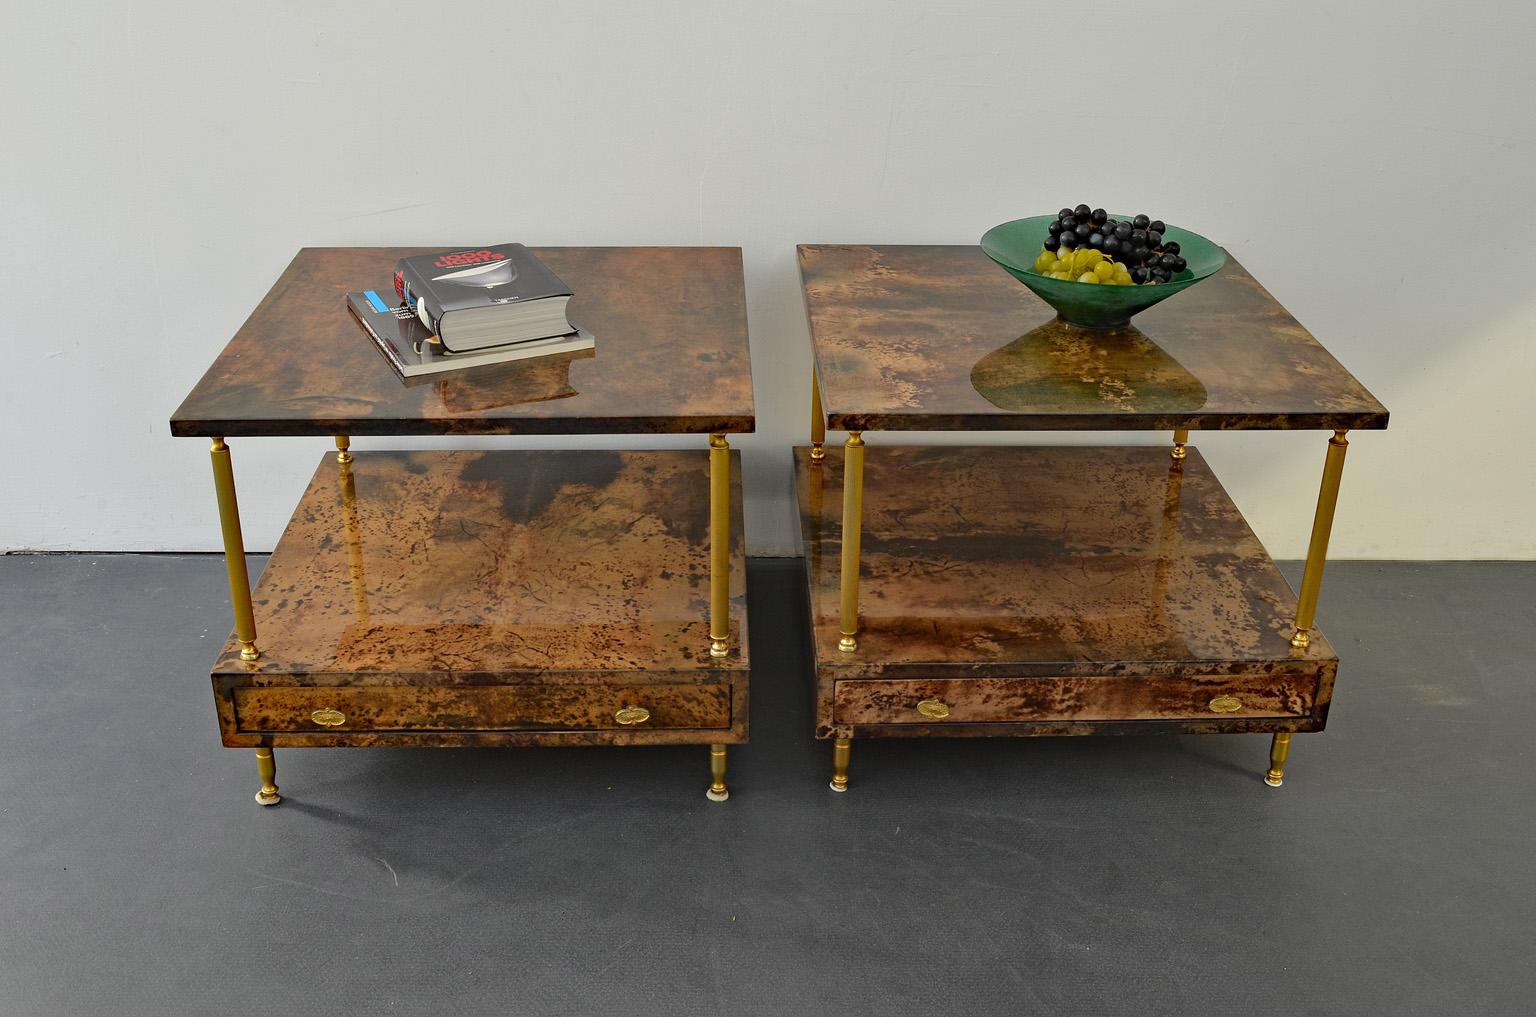 A set of two nightstands / side tables / nesting tables by Aldo Tura for Tura Milano, Italy, 1960s midcentury.
The color of both is brown and the material is goatskin and brass.
Every nightstand has a drawer.